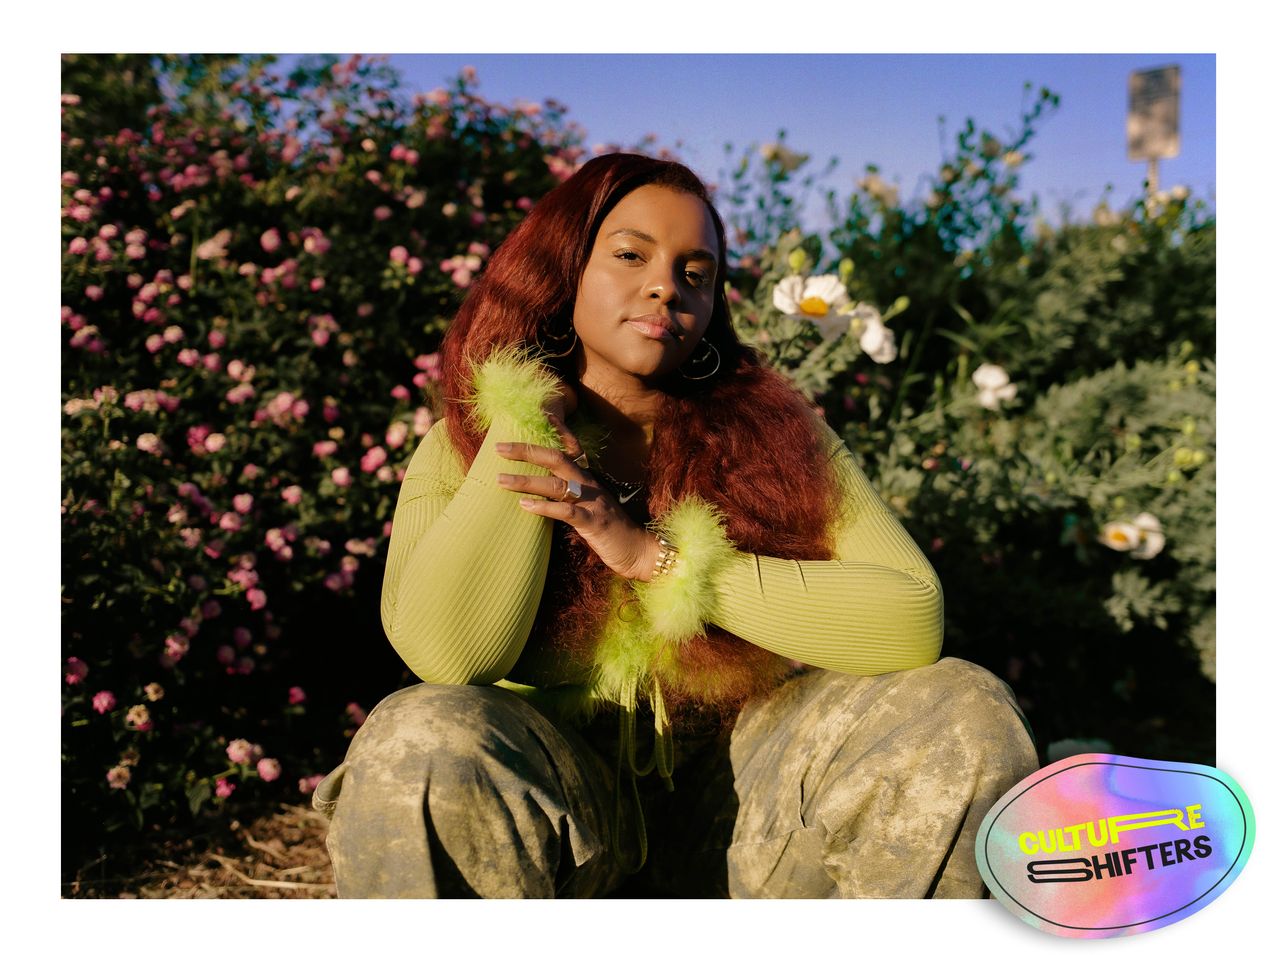 Latashá Alcindor is a Los Angeles-based rapper who is creating freedom in her music career through cryptocurrency and non-fungible tokens.